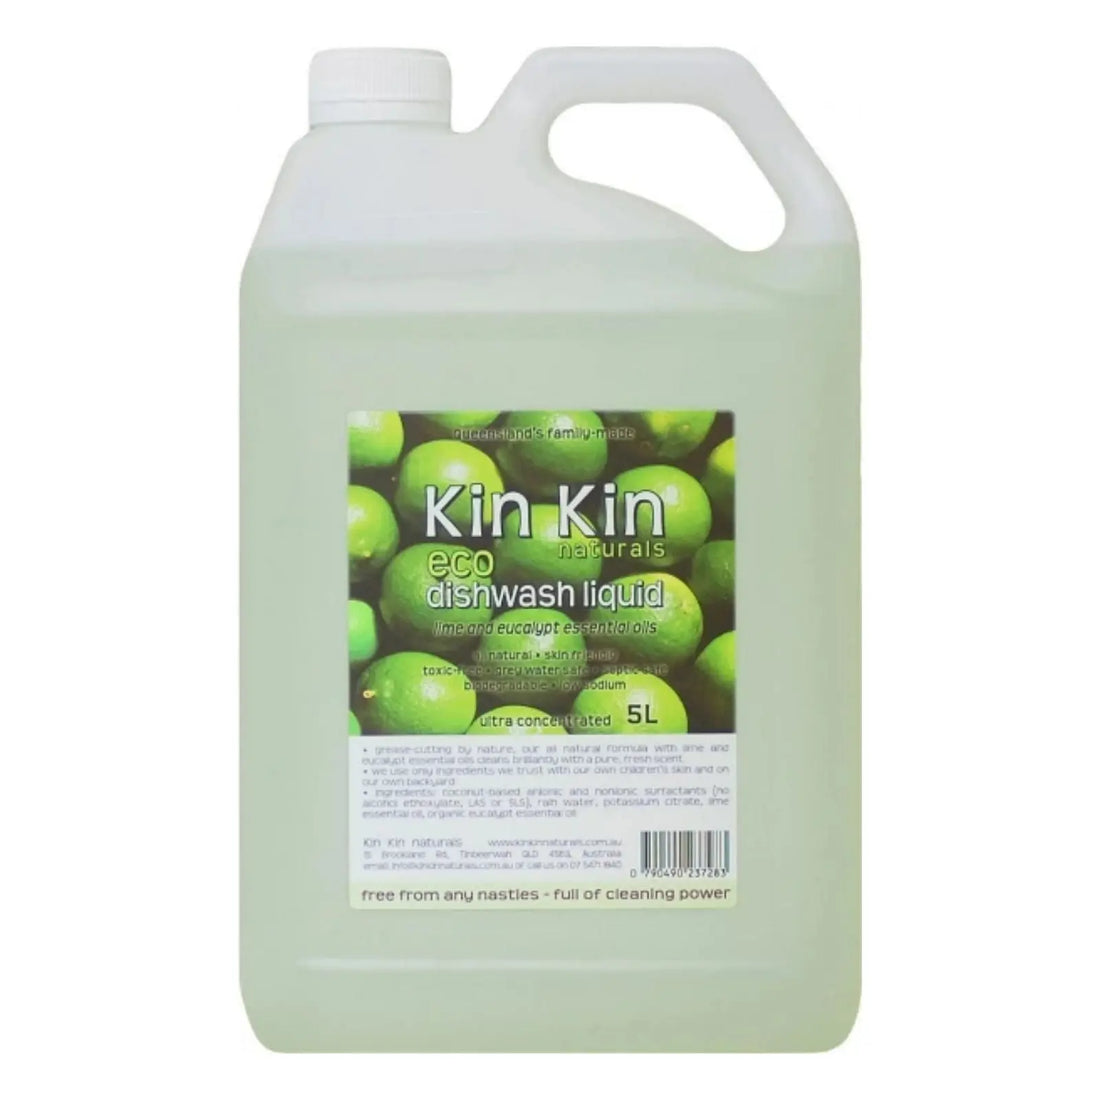 Dishwashing liquid Lime & Eucalypt 5L-Household-Kin Kin Naturals-Sovereign Foods-Cleaning-Australian Made